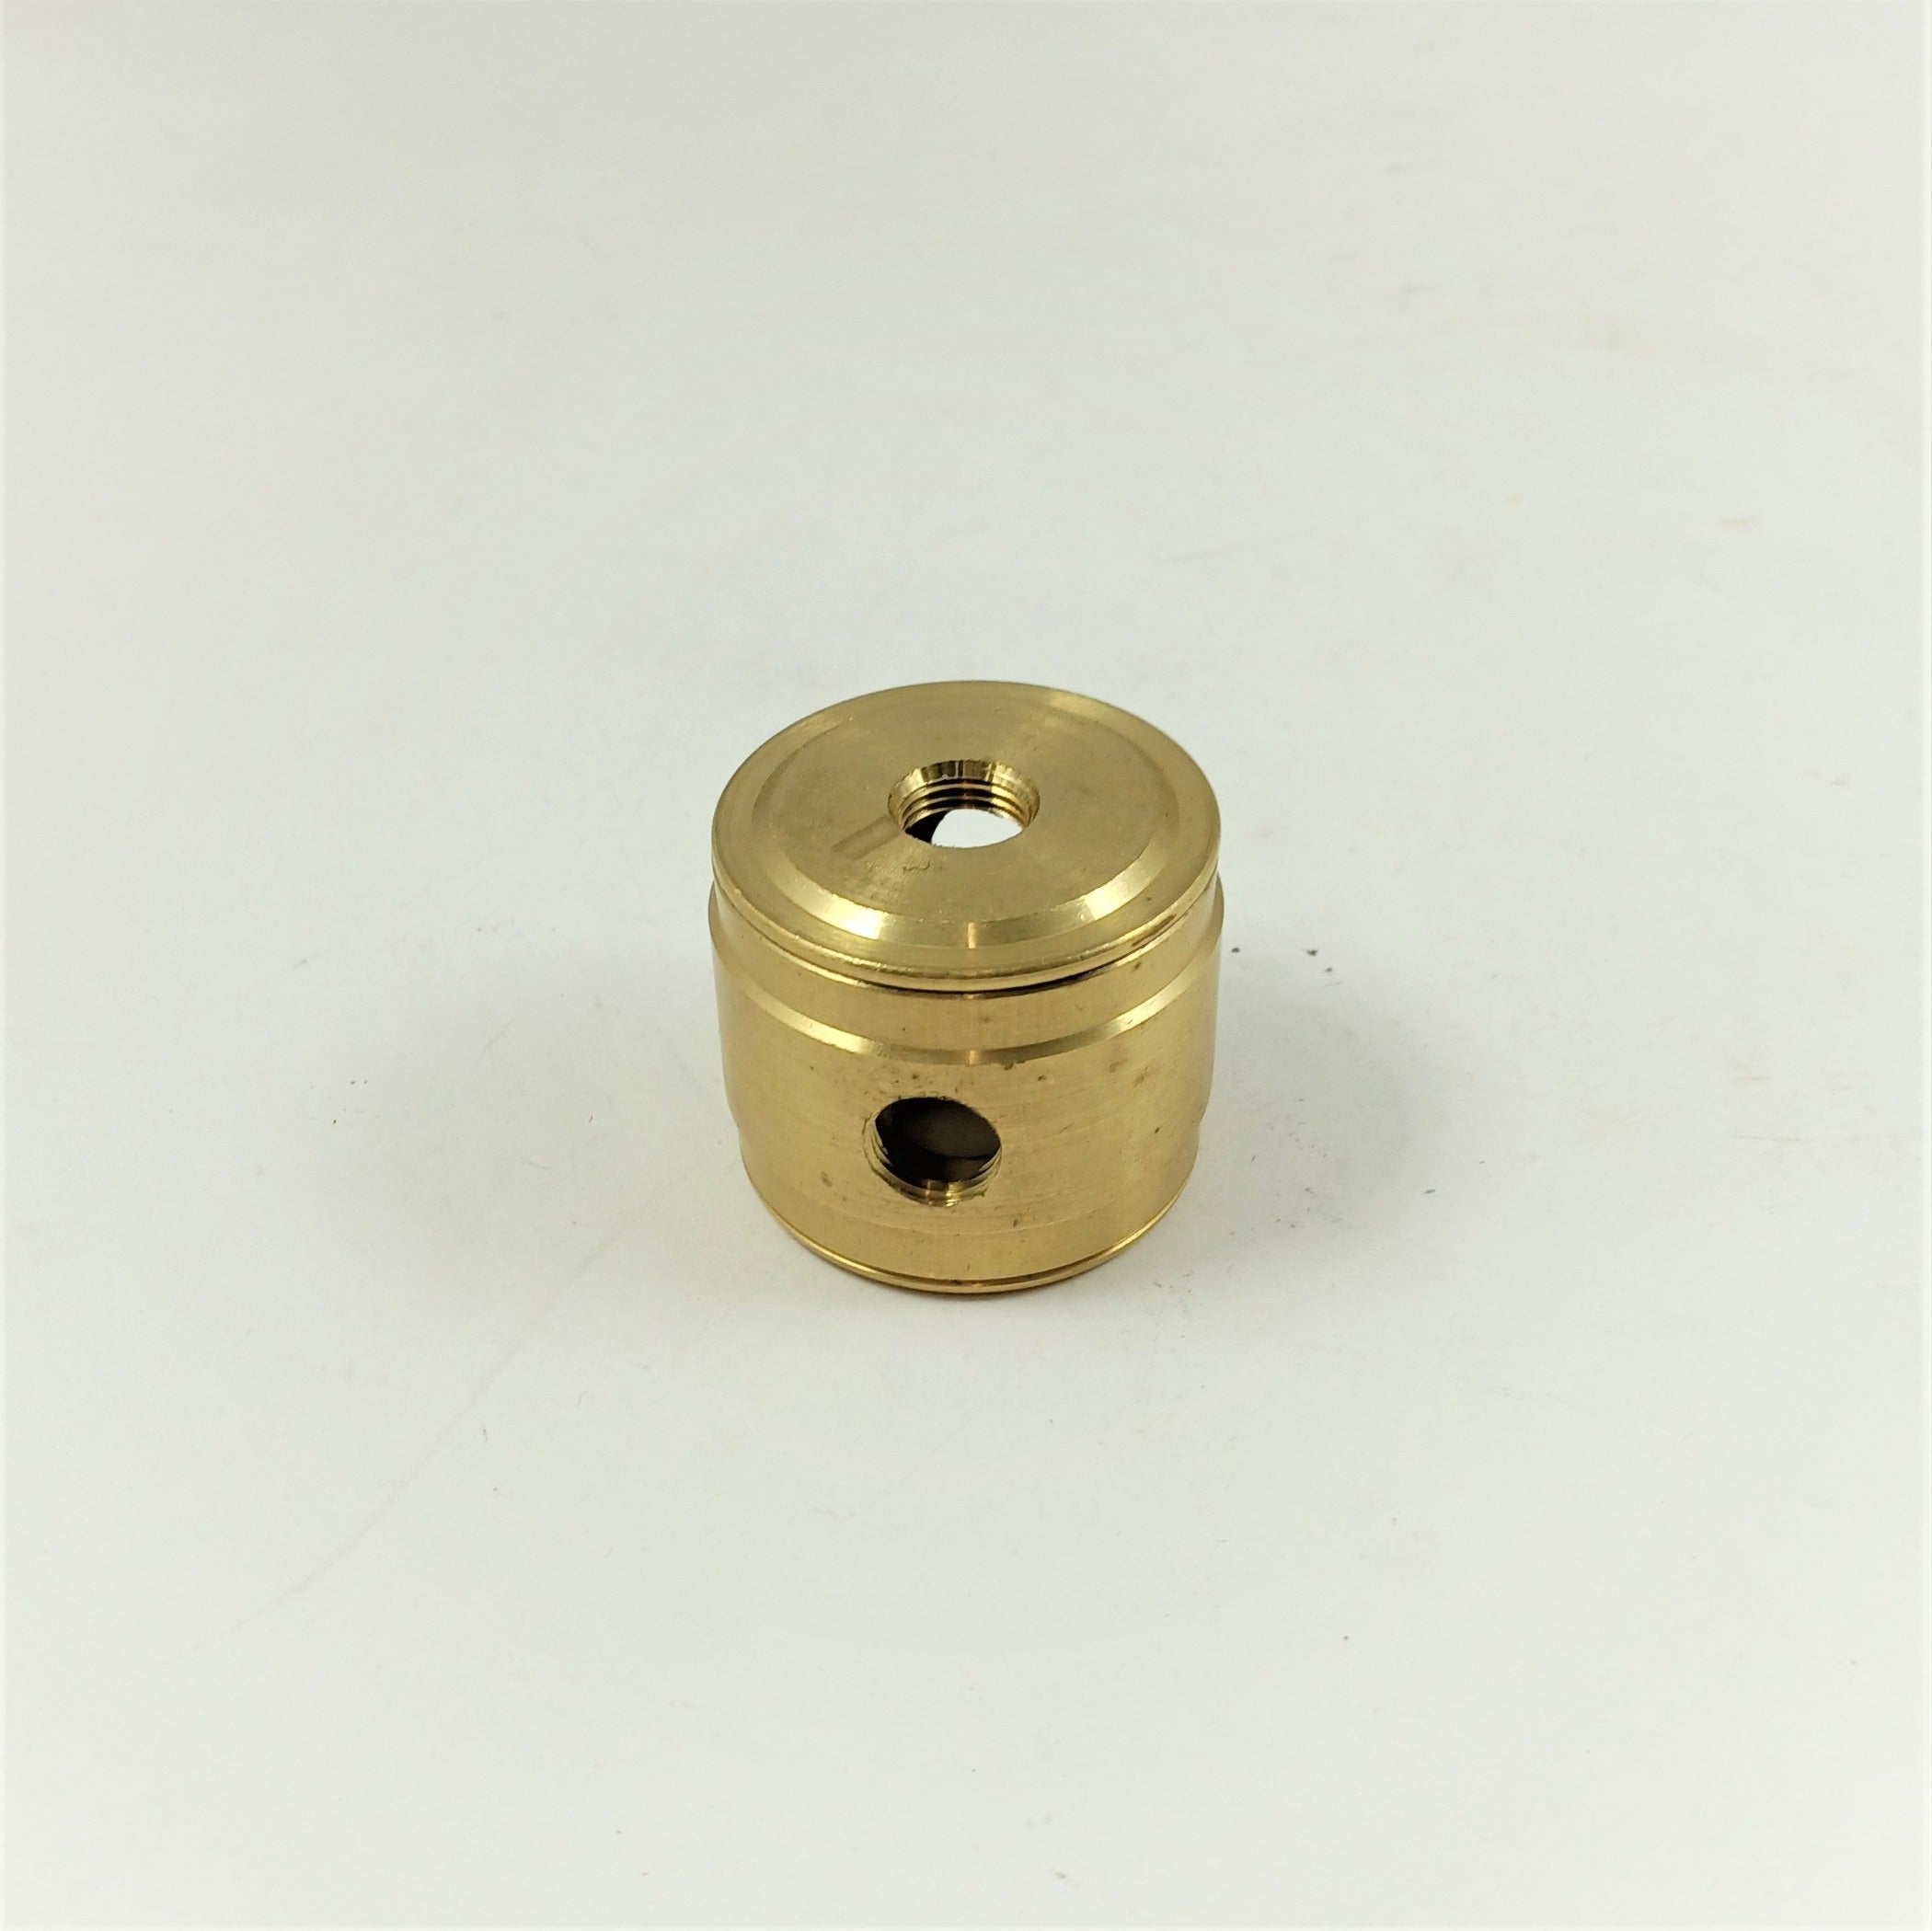 Turned Brass Two-Piece Cluster Body - 2 Holes - 1-11/32" High